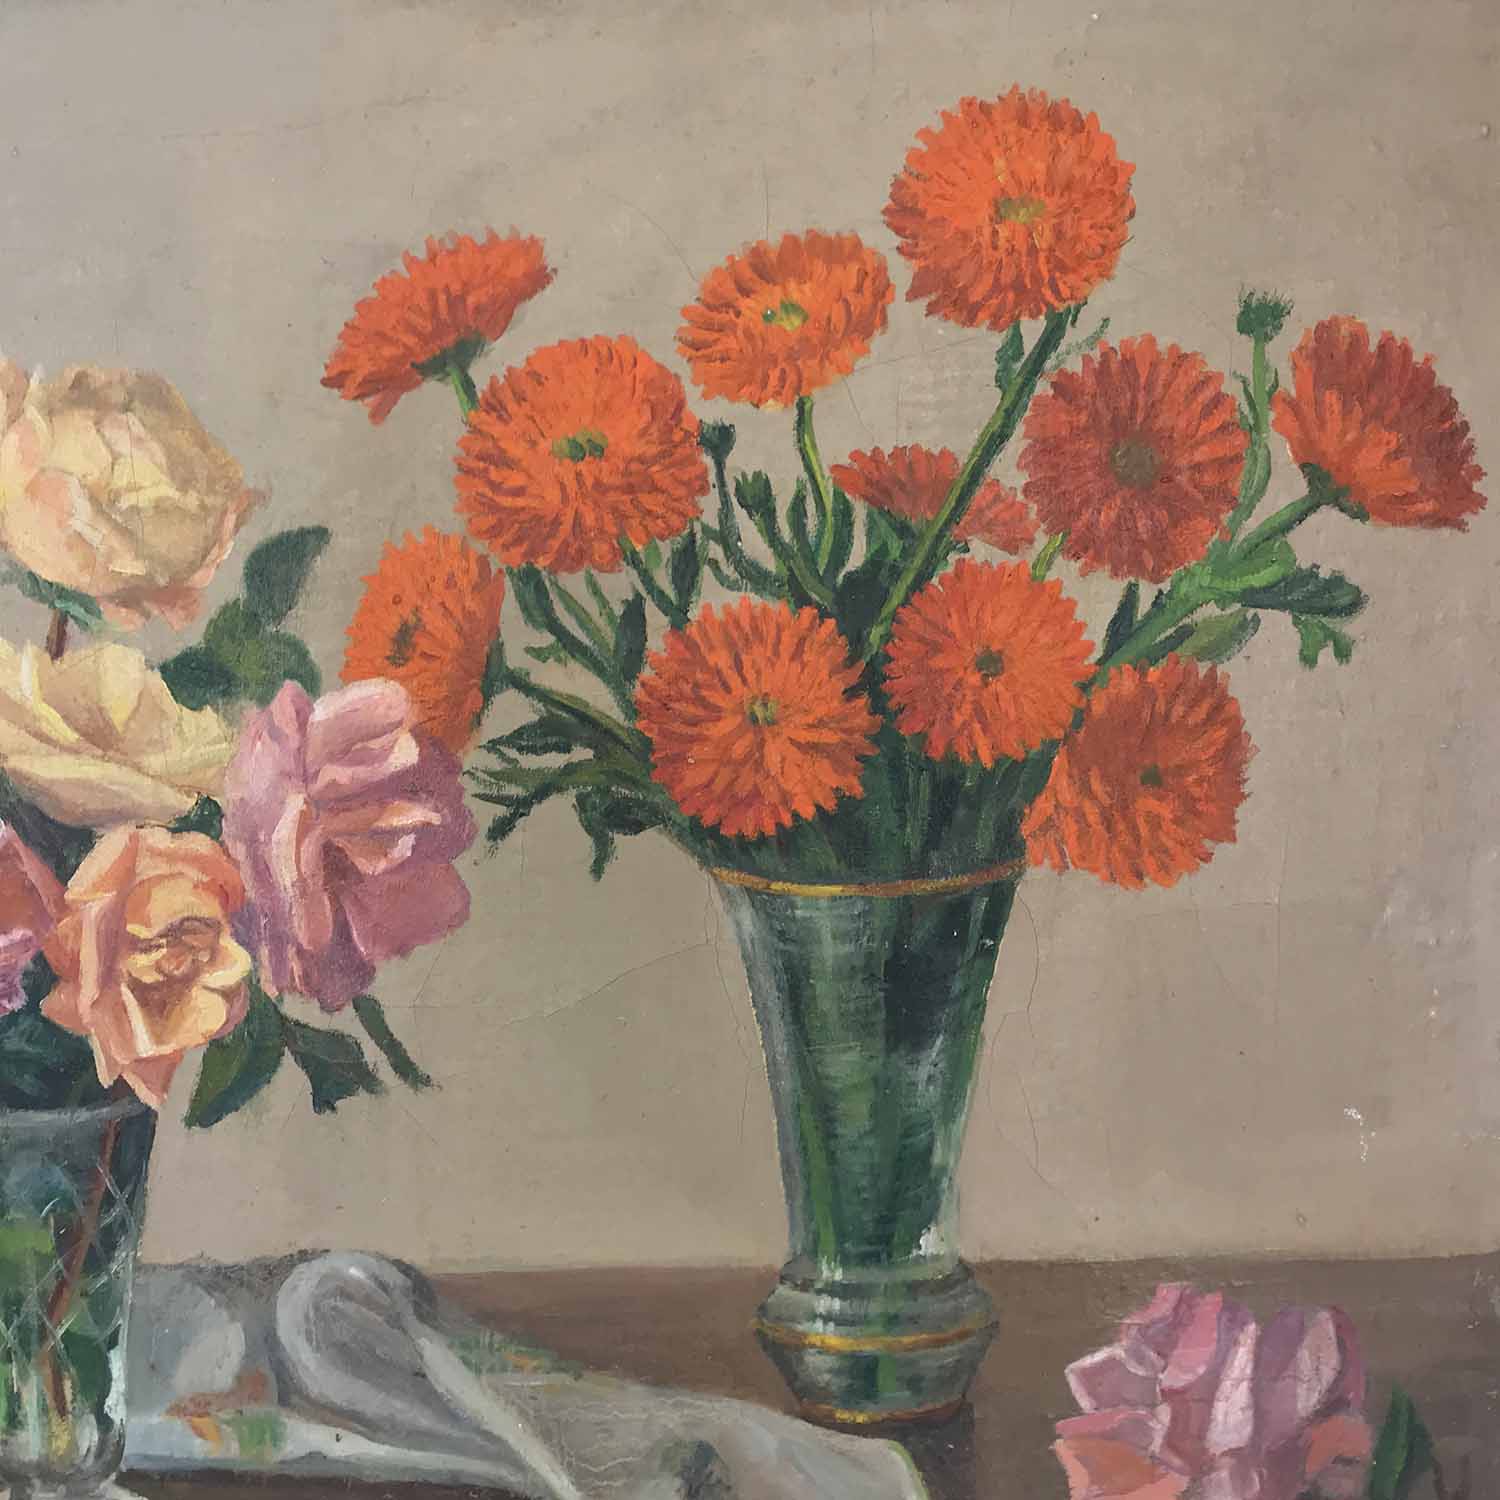 MID 20th CENTURY SPANISH SCHOOL 'Still Life of Flowers', oil on canvas, signed lower left M.L. - Image 3 of 5